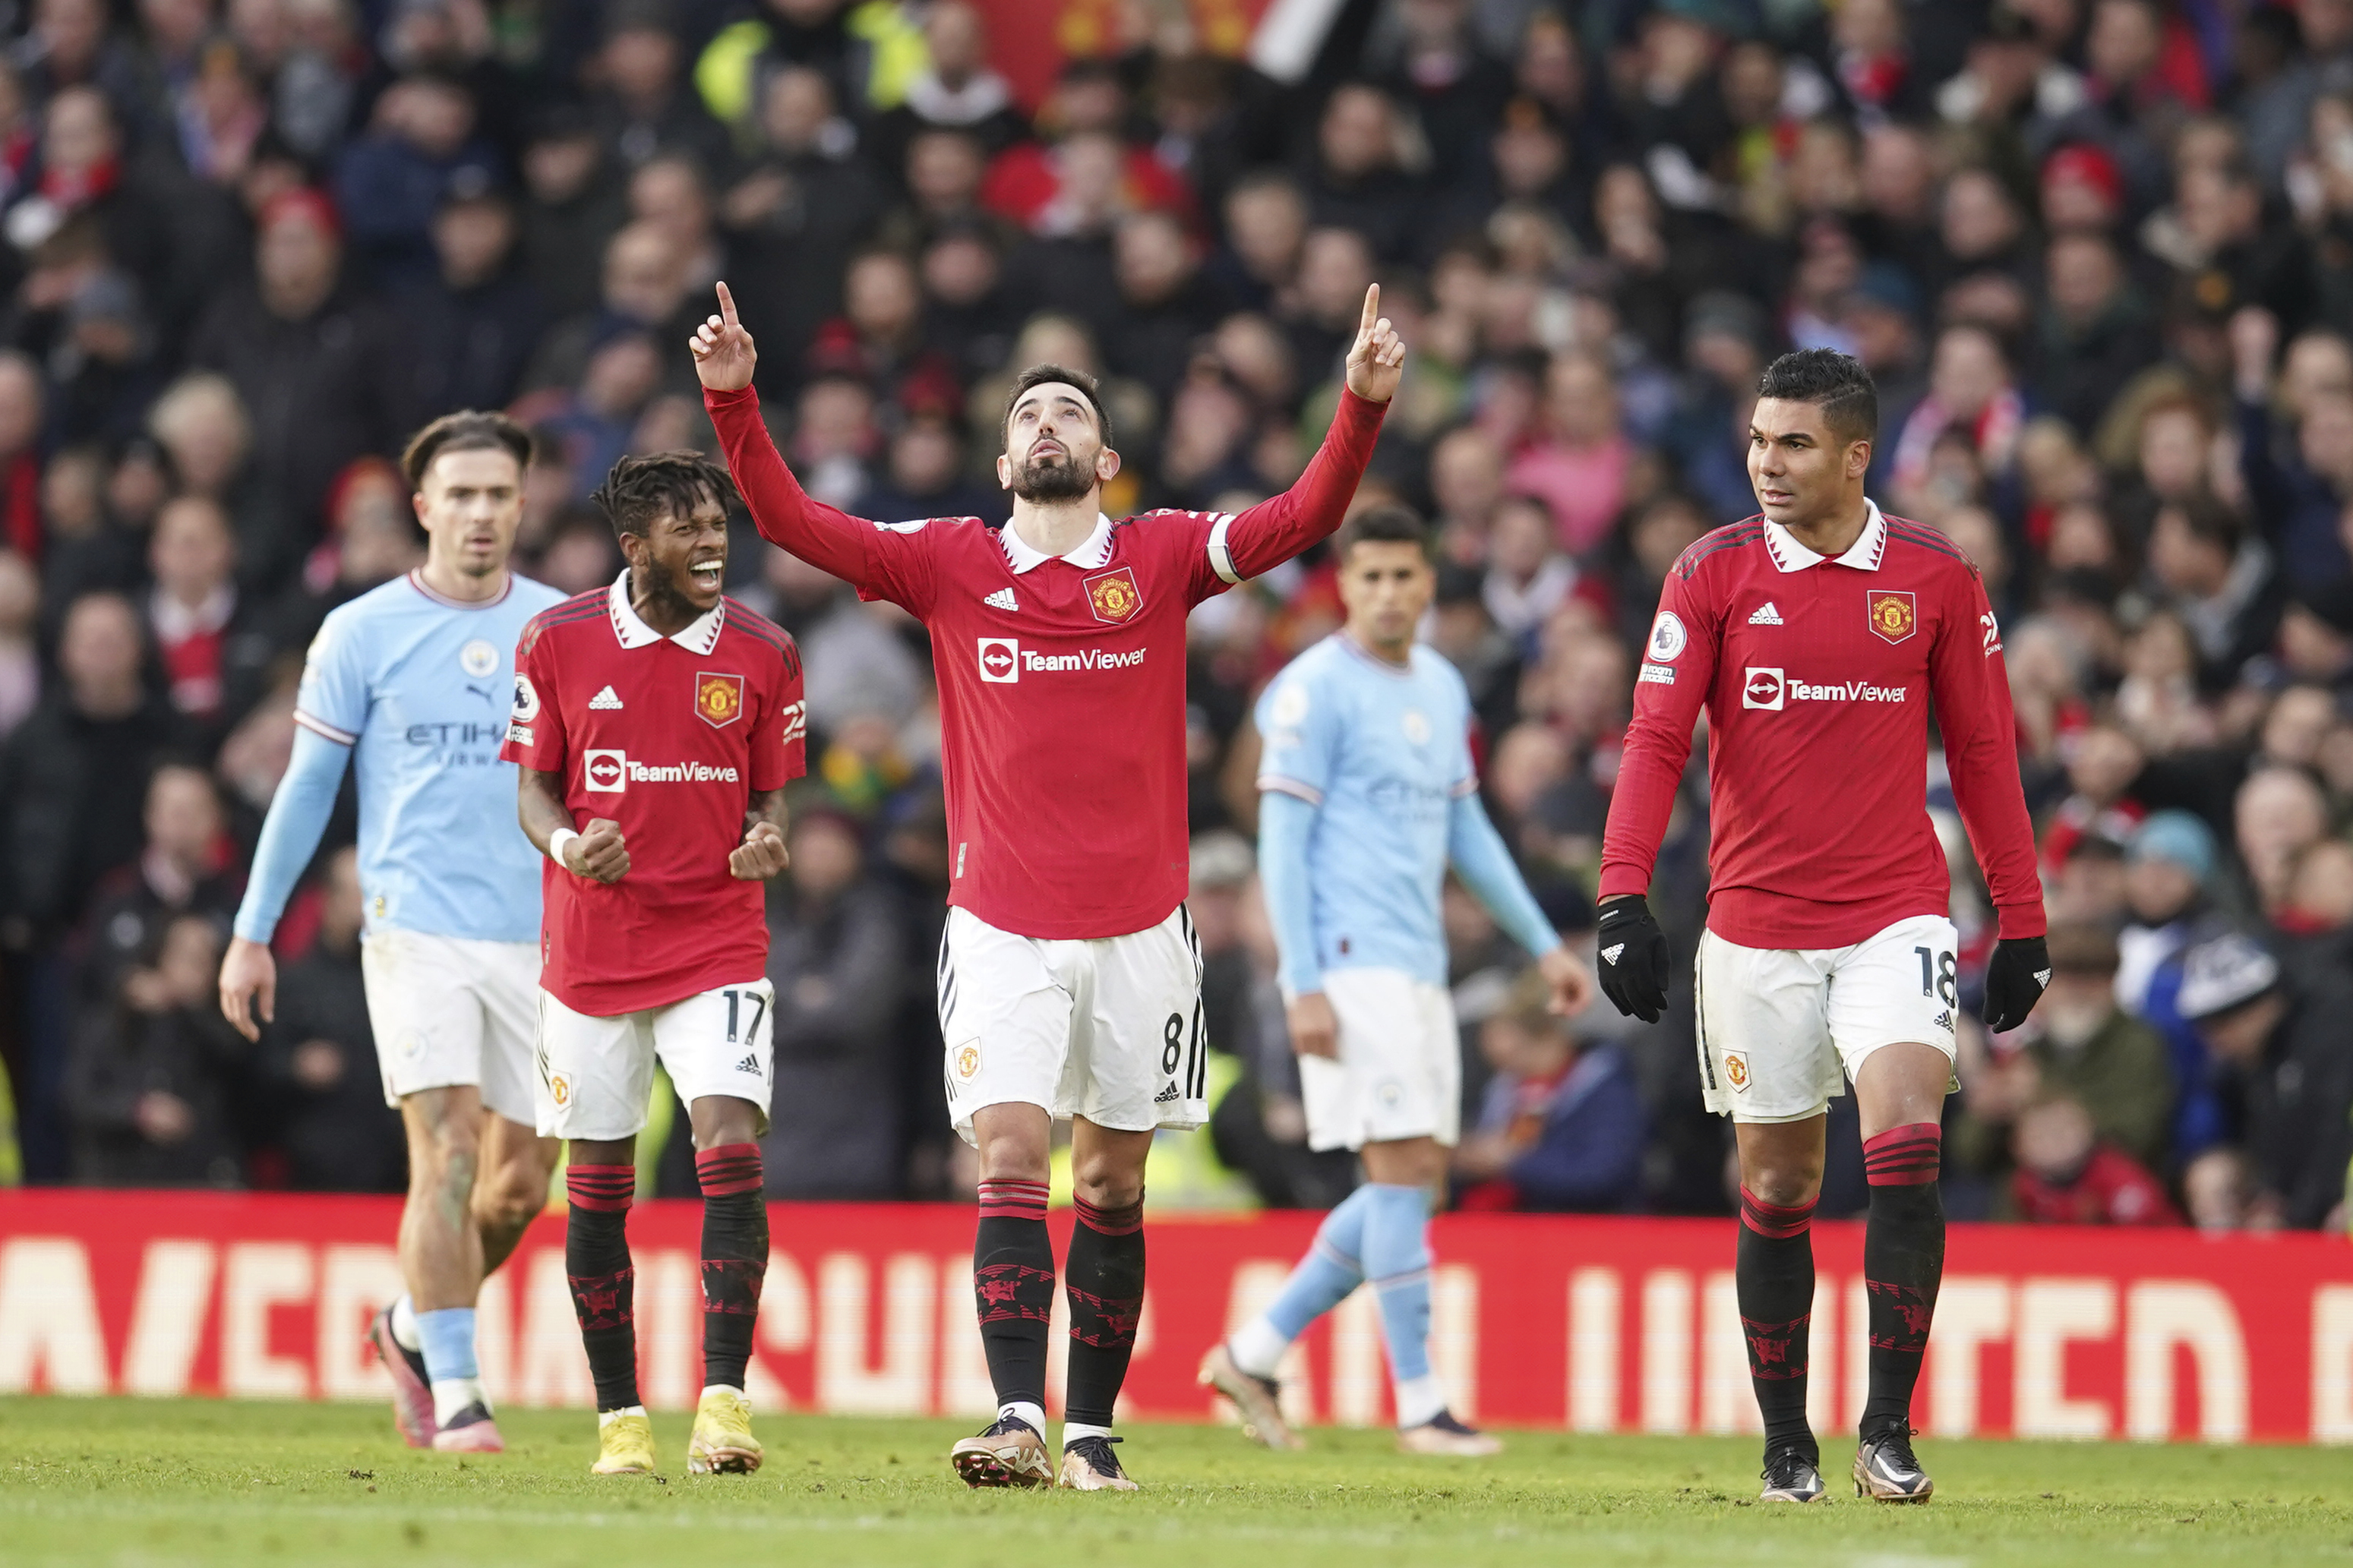 Bruno Fernandes of Manchester United celebrates after scoring against Manchester City, Saturday, Jan. 14, 2023 (AP Photo/Dave Thompson)